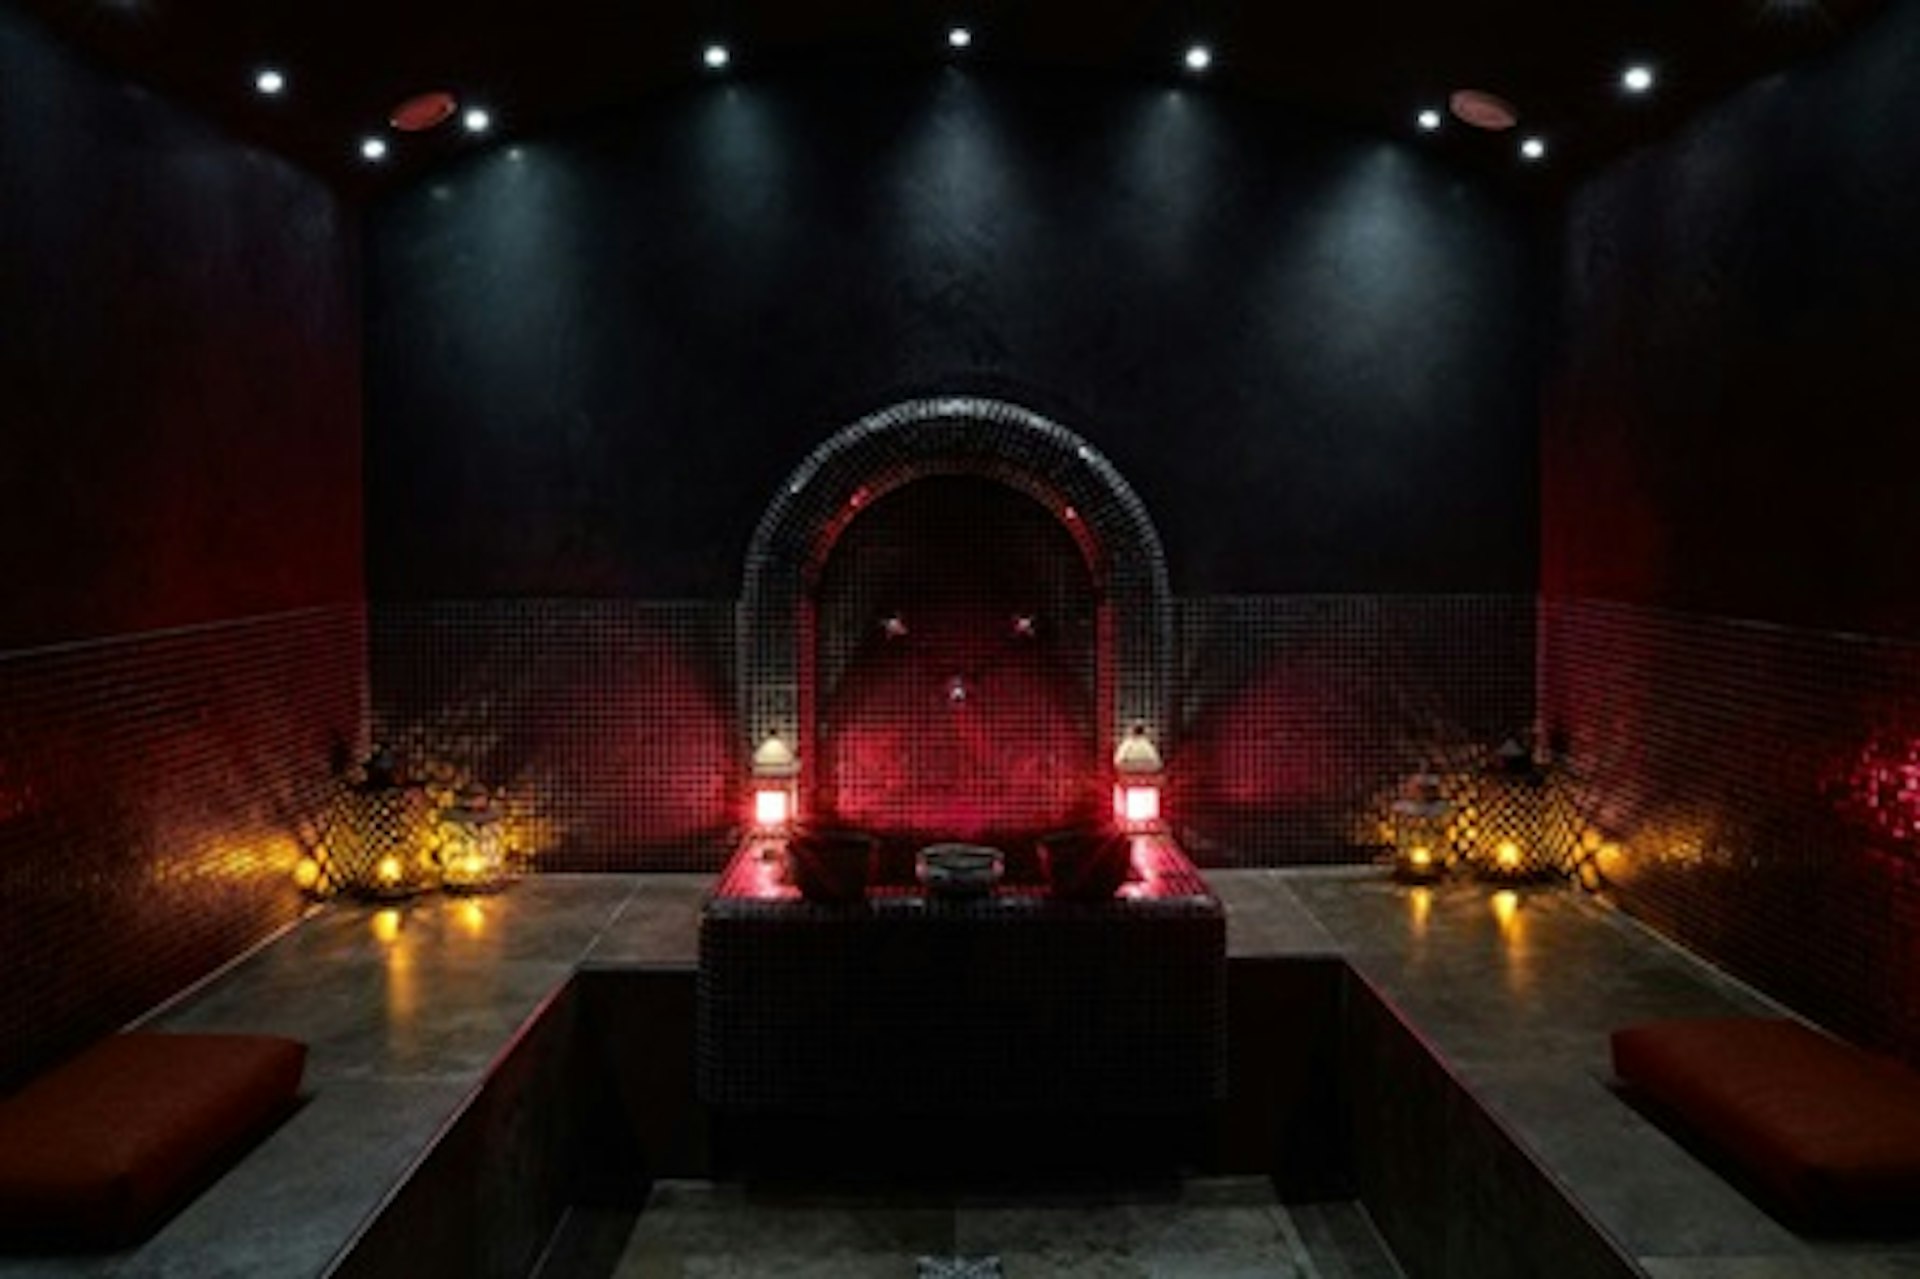 Detox Spa: Hammam Experience and Massage for Two at The Spa in Dolphin Square 1